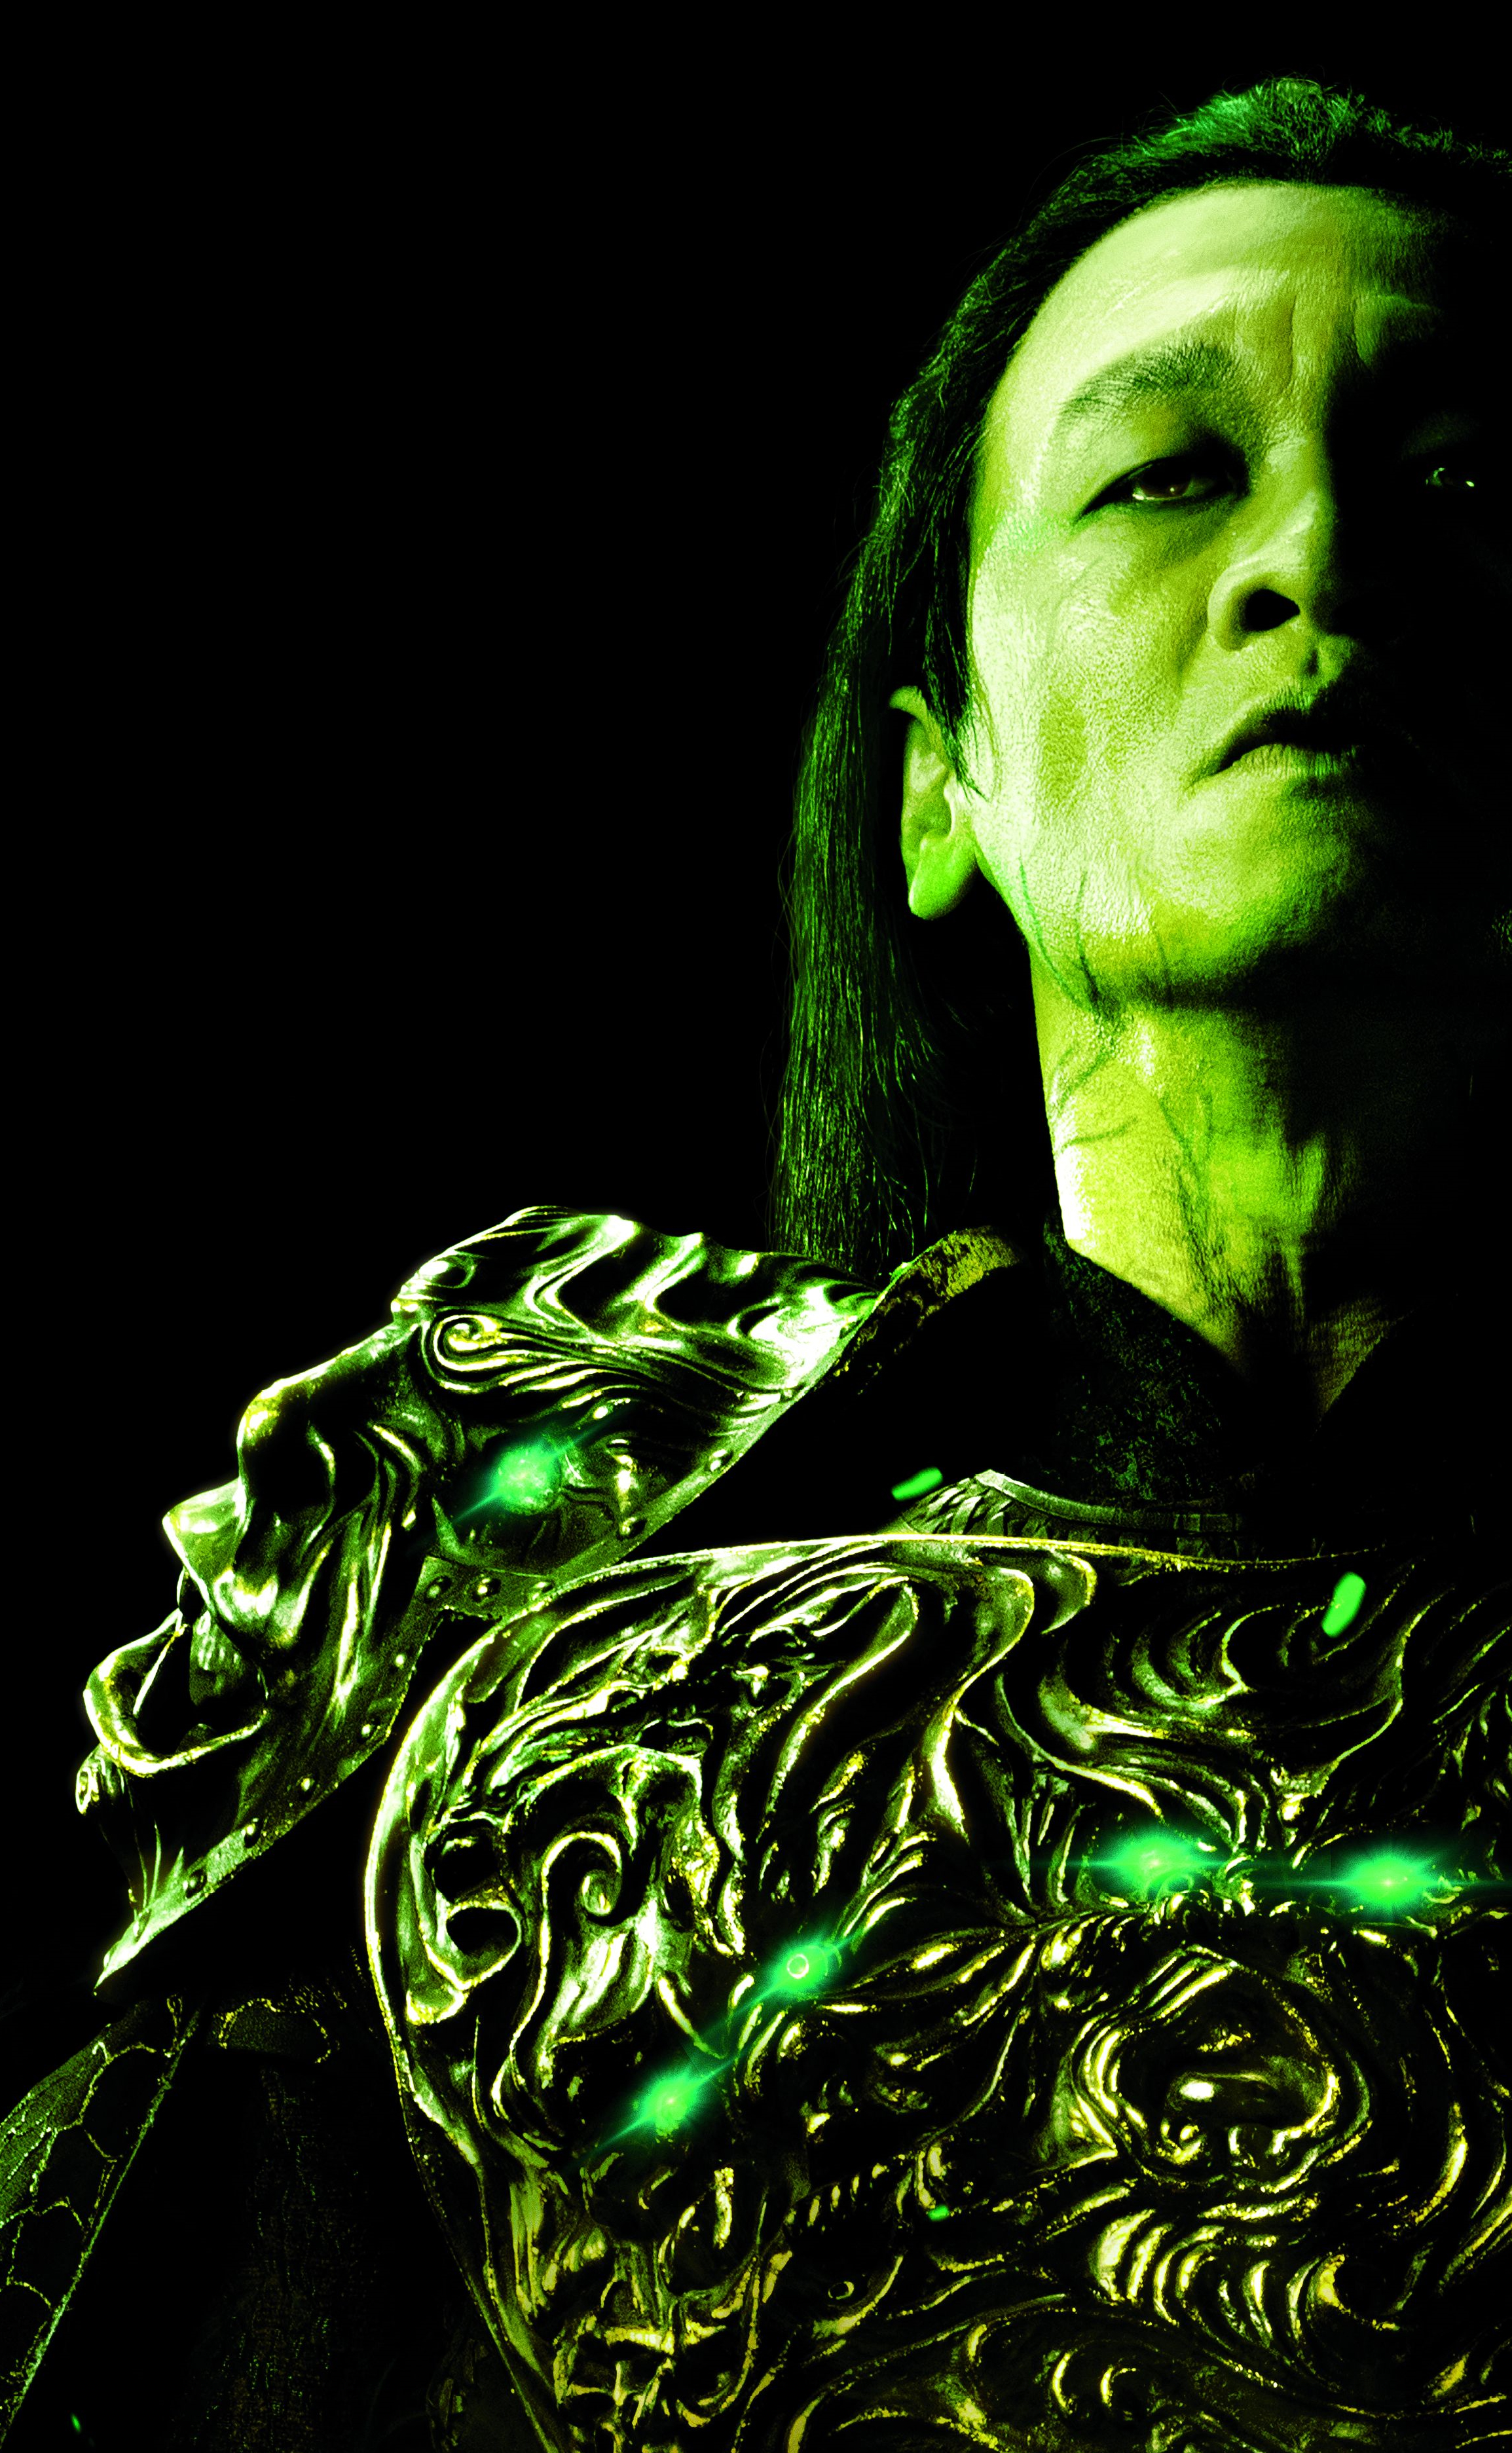 Evolution of SHANG TSUNG 🐍 1992 - 2023 What's your favorite version of Shang  Tsung? #MK30 #MortalKombat #ShangTsung #MortalKombat1…